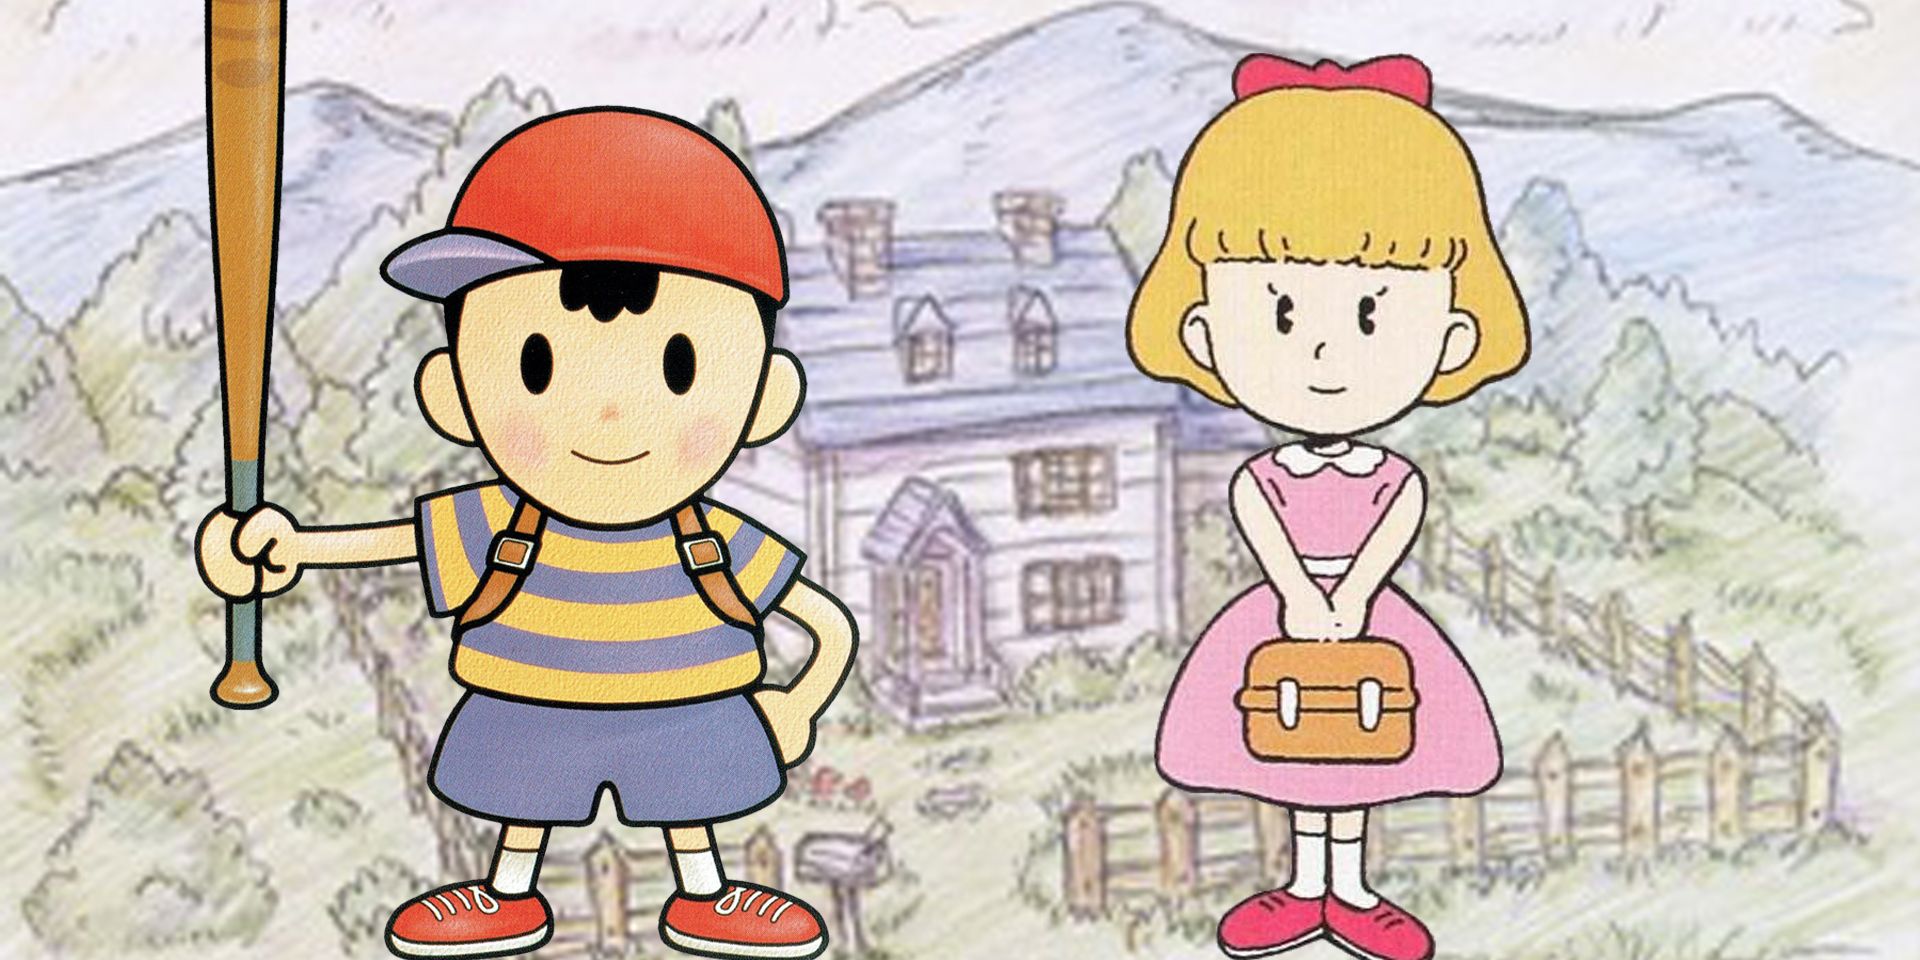 Ness and Paula team up in Earthbound